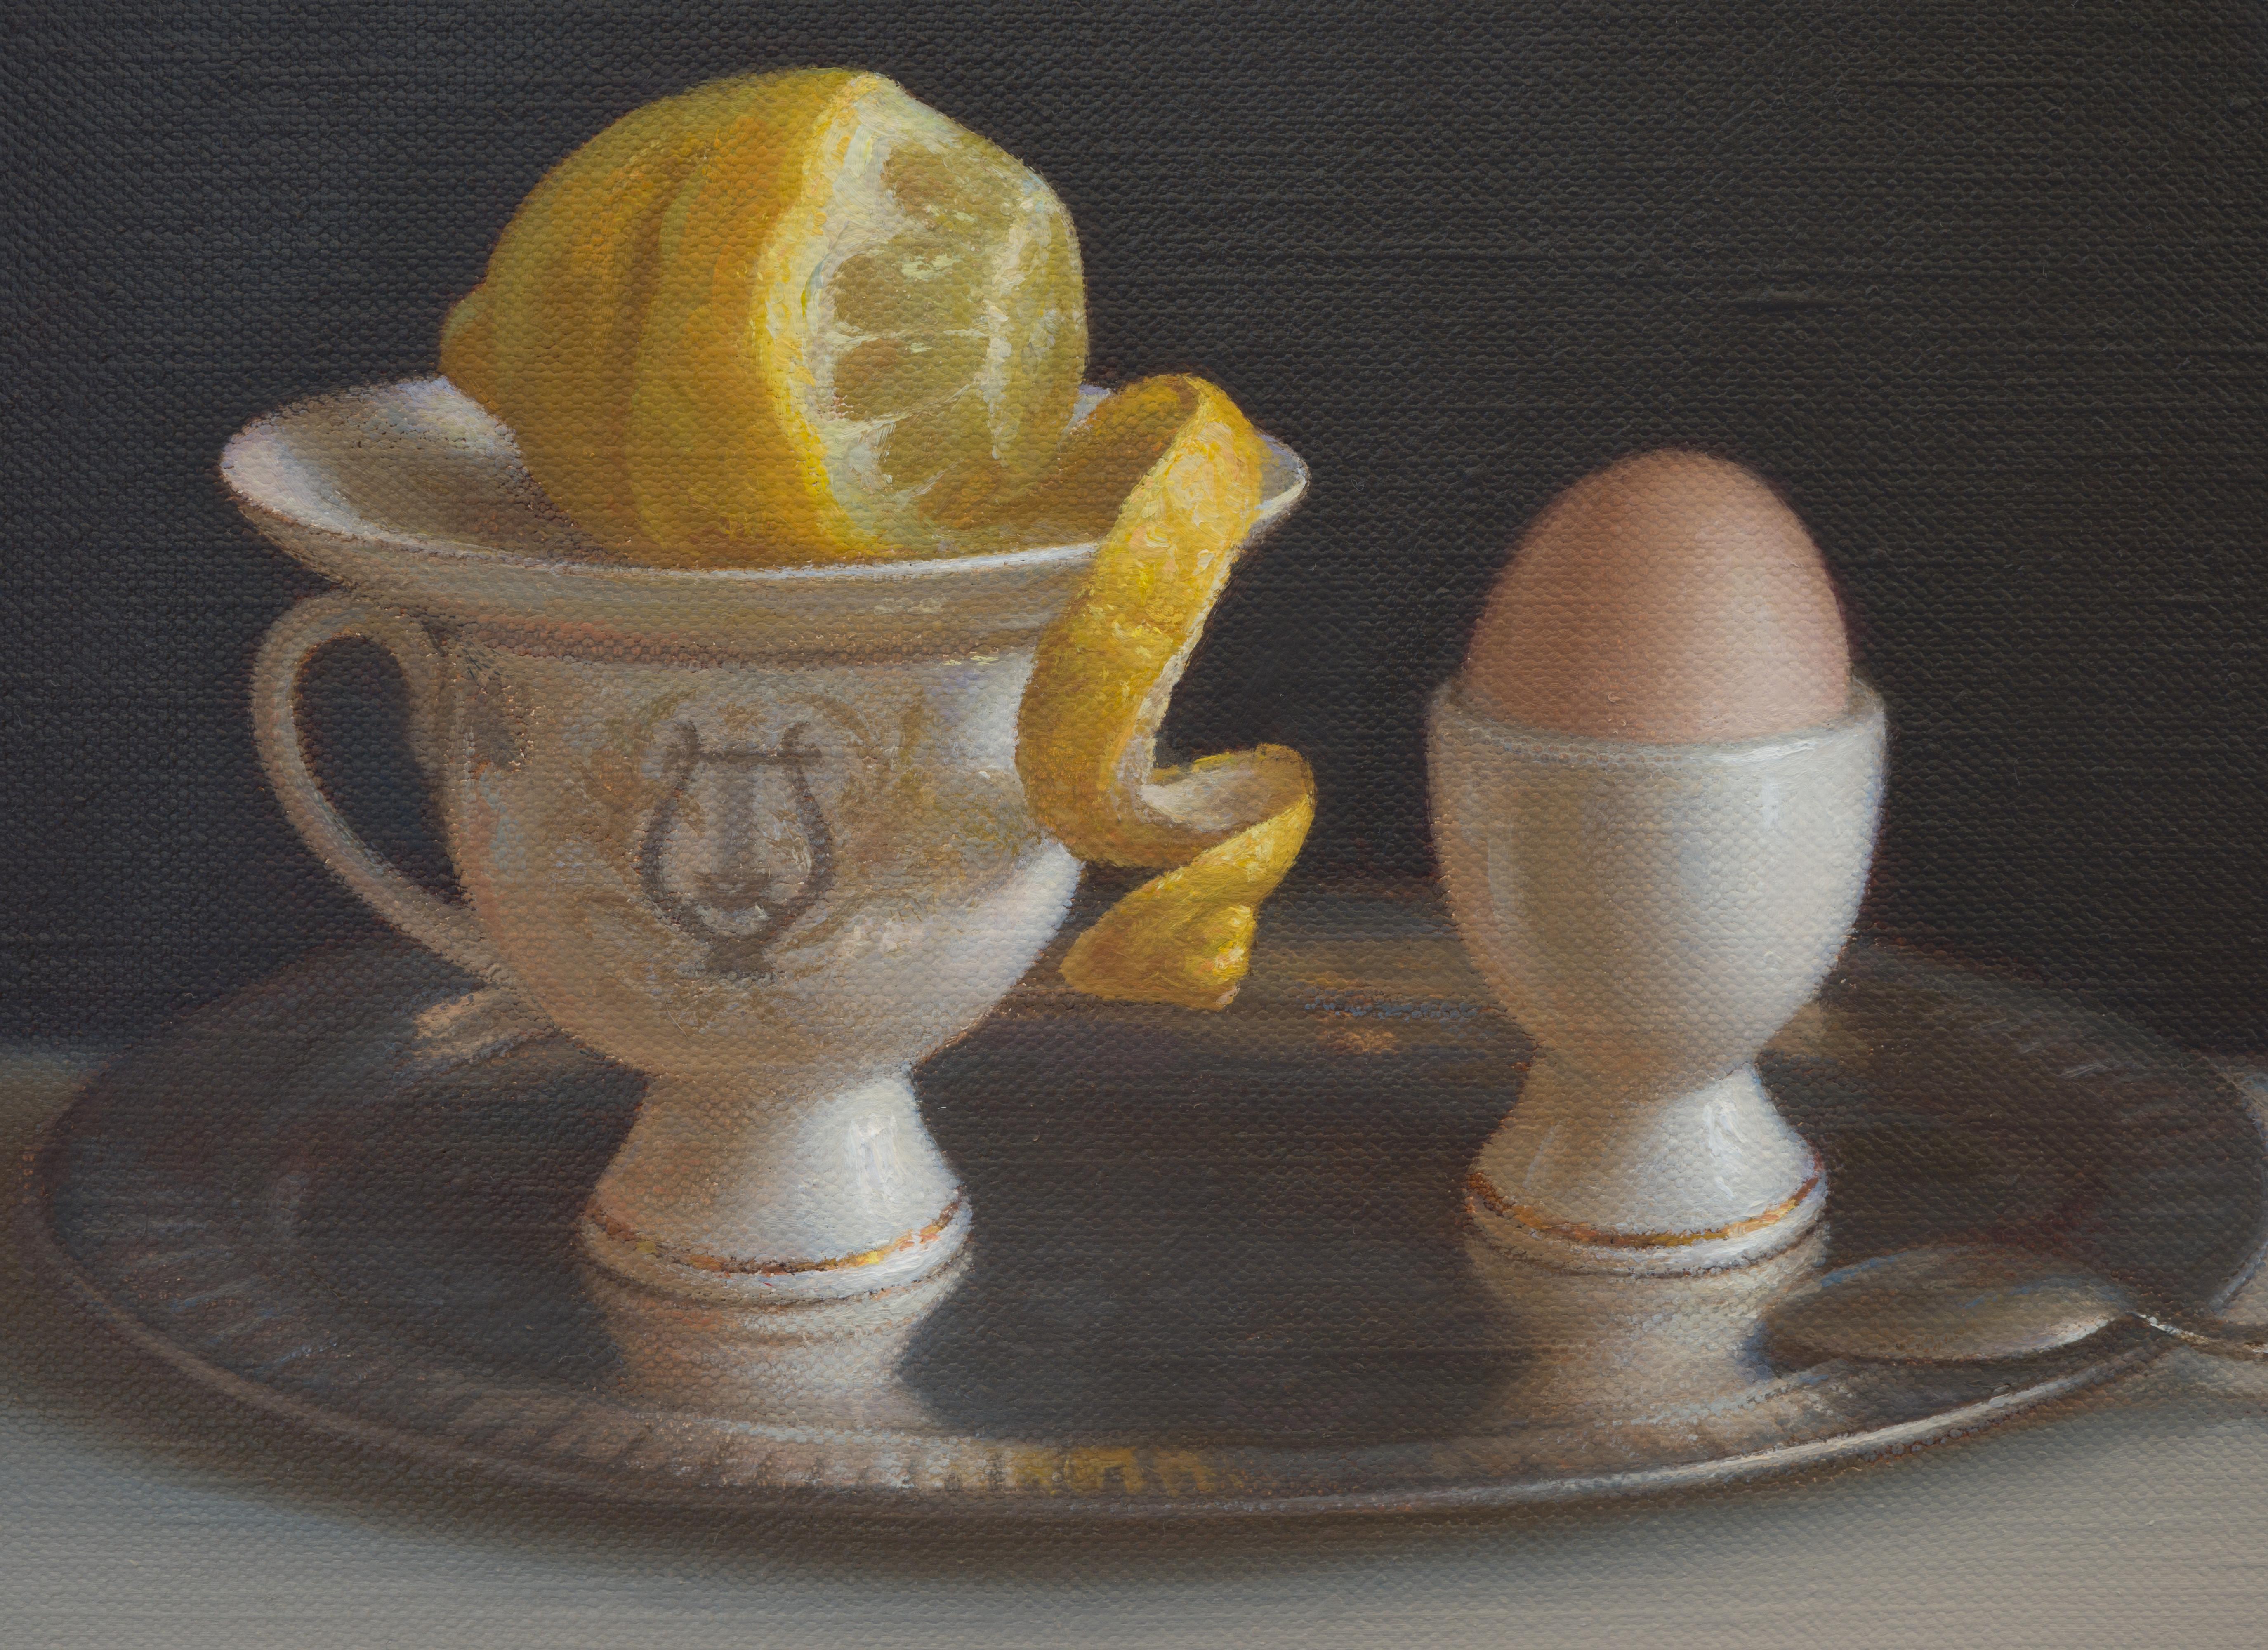 This work evokes the past, both in technique and in subject. I love the way the objects are reflected on the silver plate and the subtle warm and cool color throughout. Contemporary floral still life in realistic style. The work is painted from life